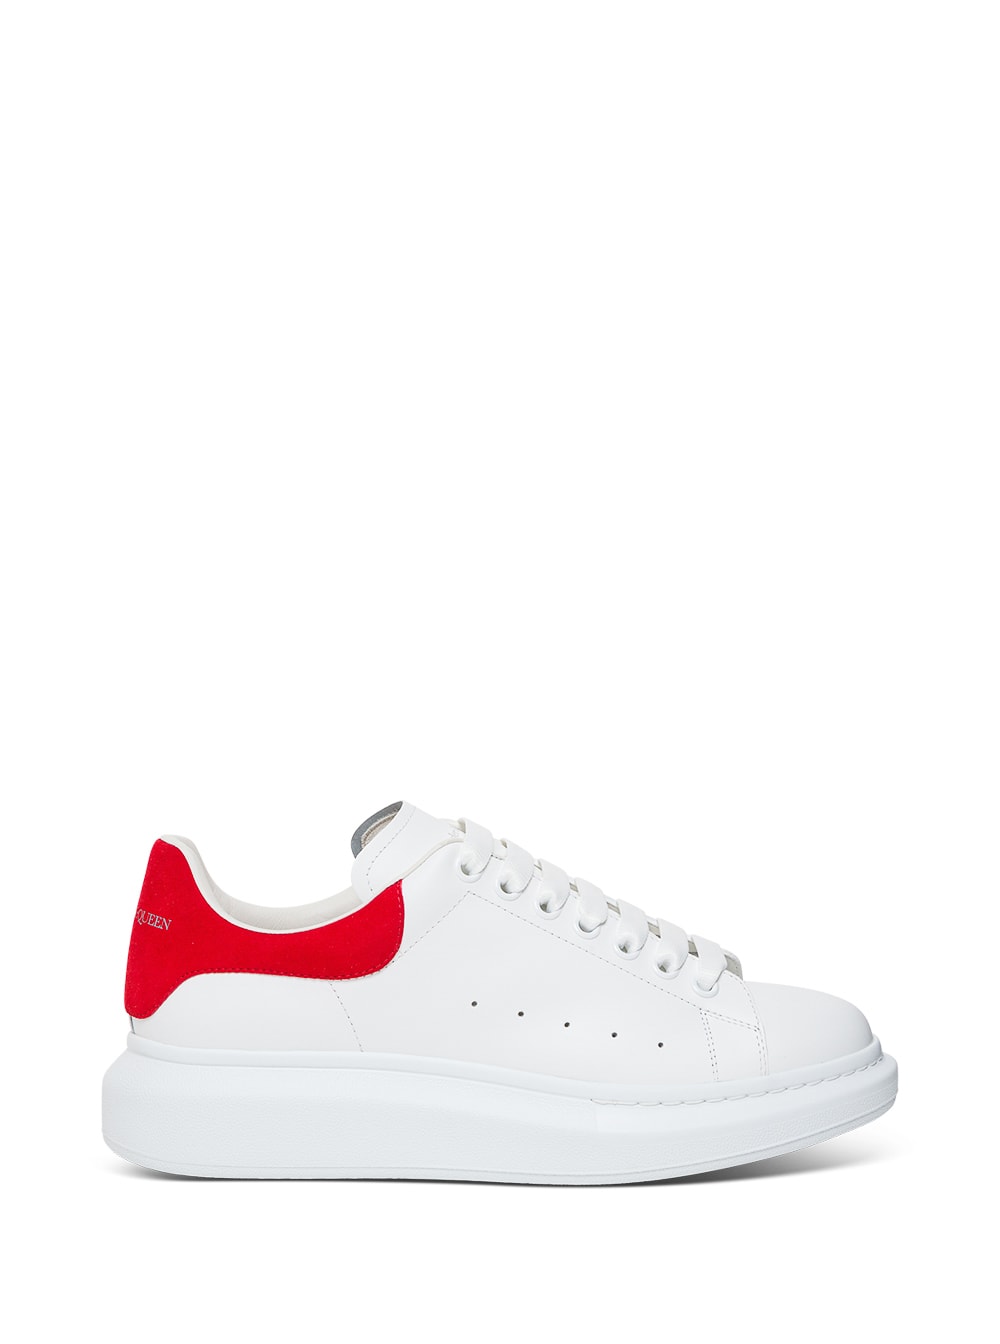 Alexander McQueen Oversize White Leather Sneakers